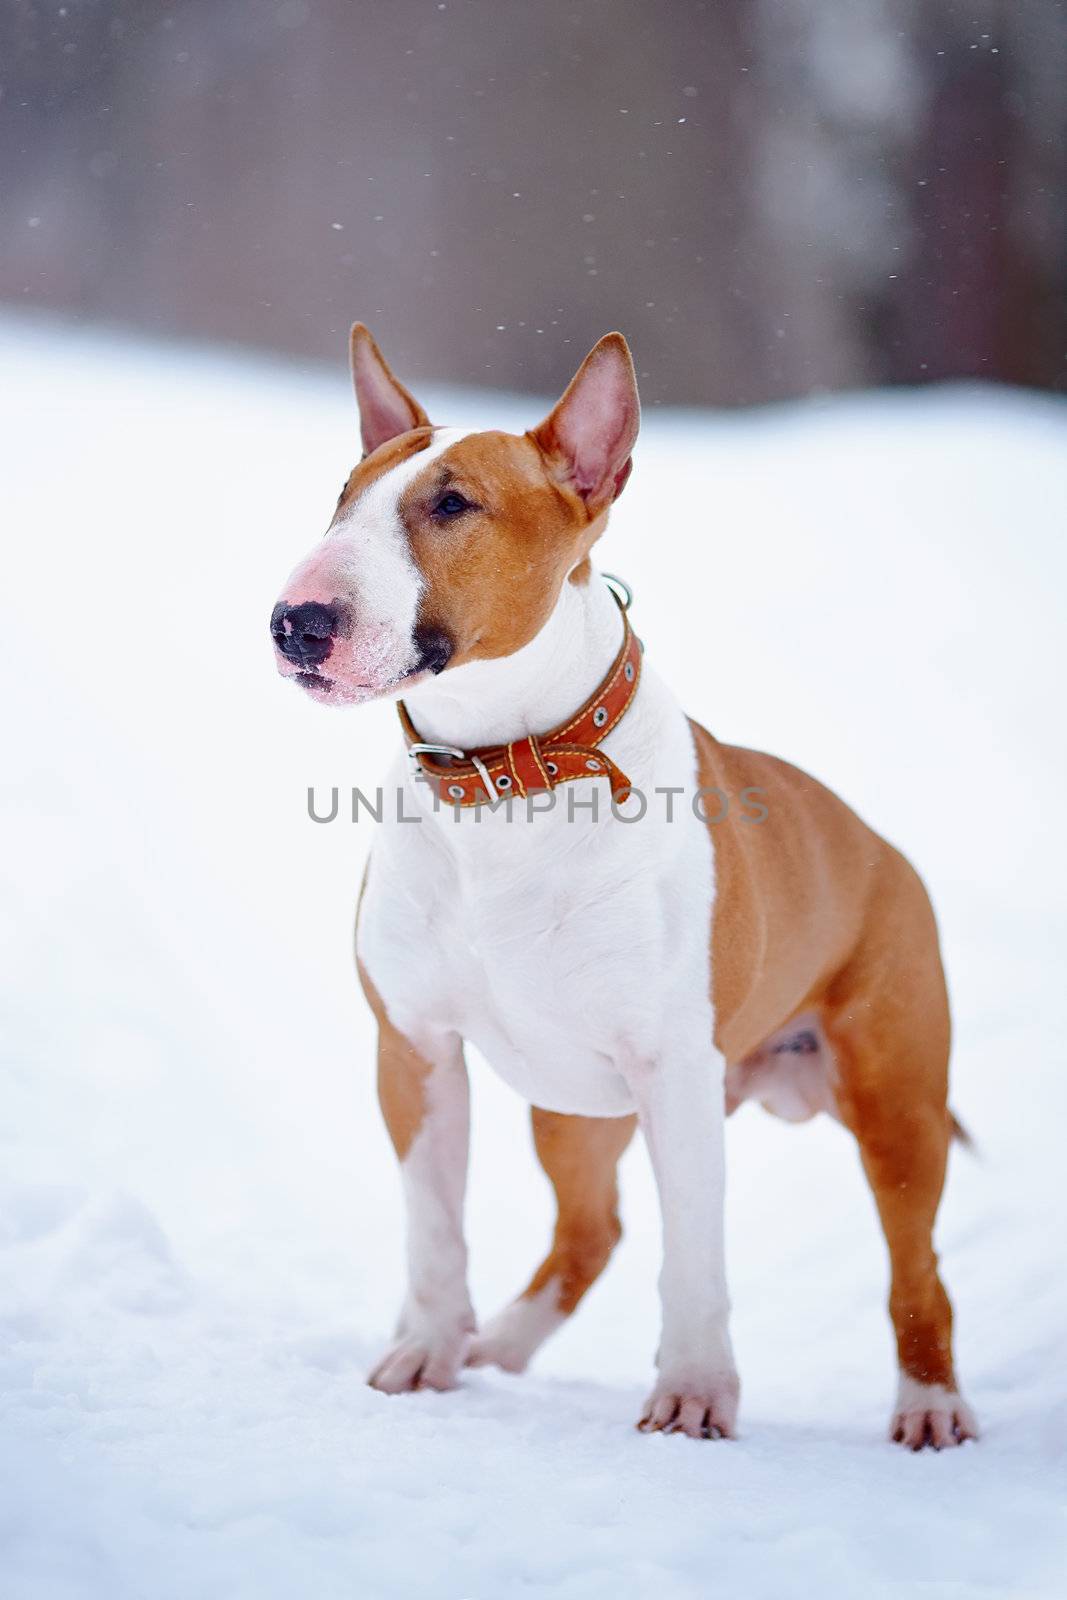 English bull terrier. Thoroughbred dog. Canine friend. Red dog.